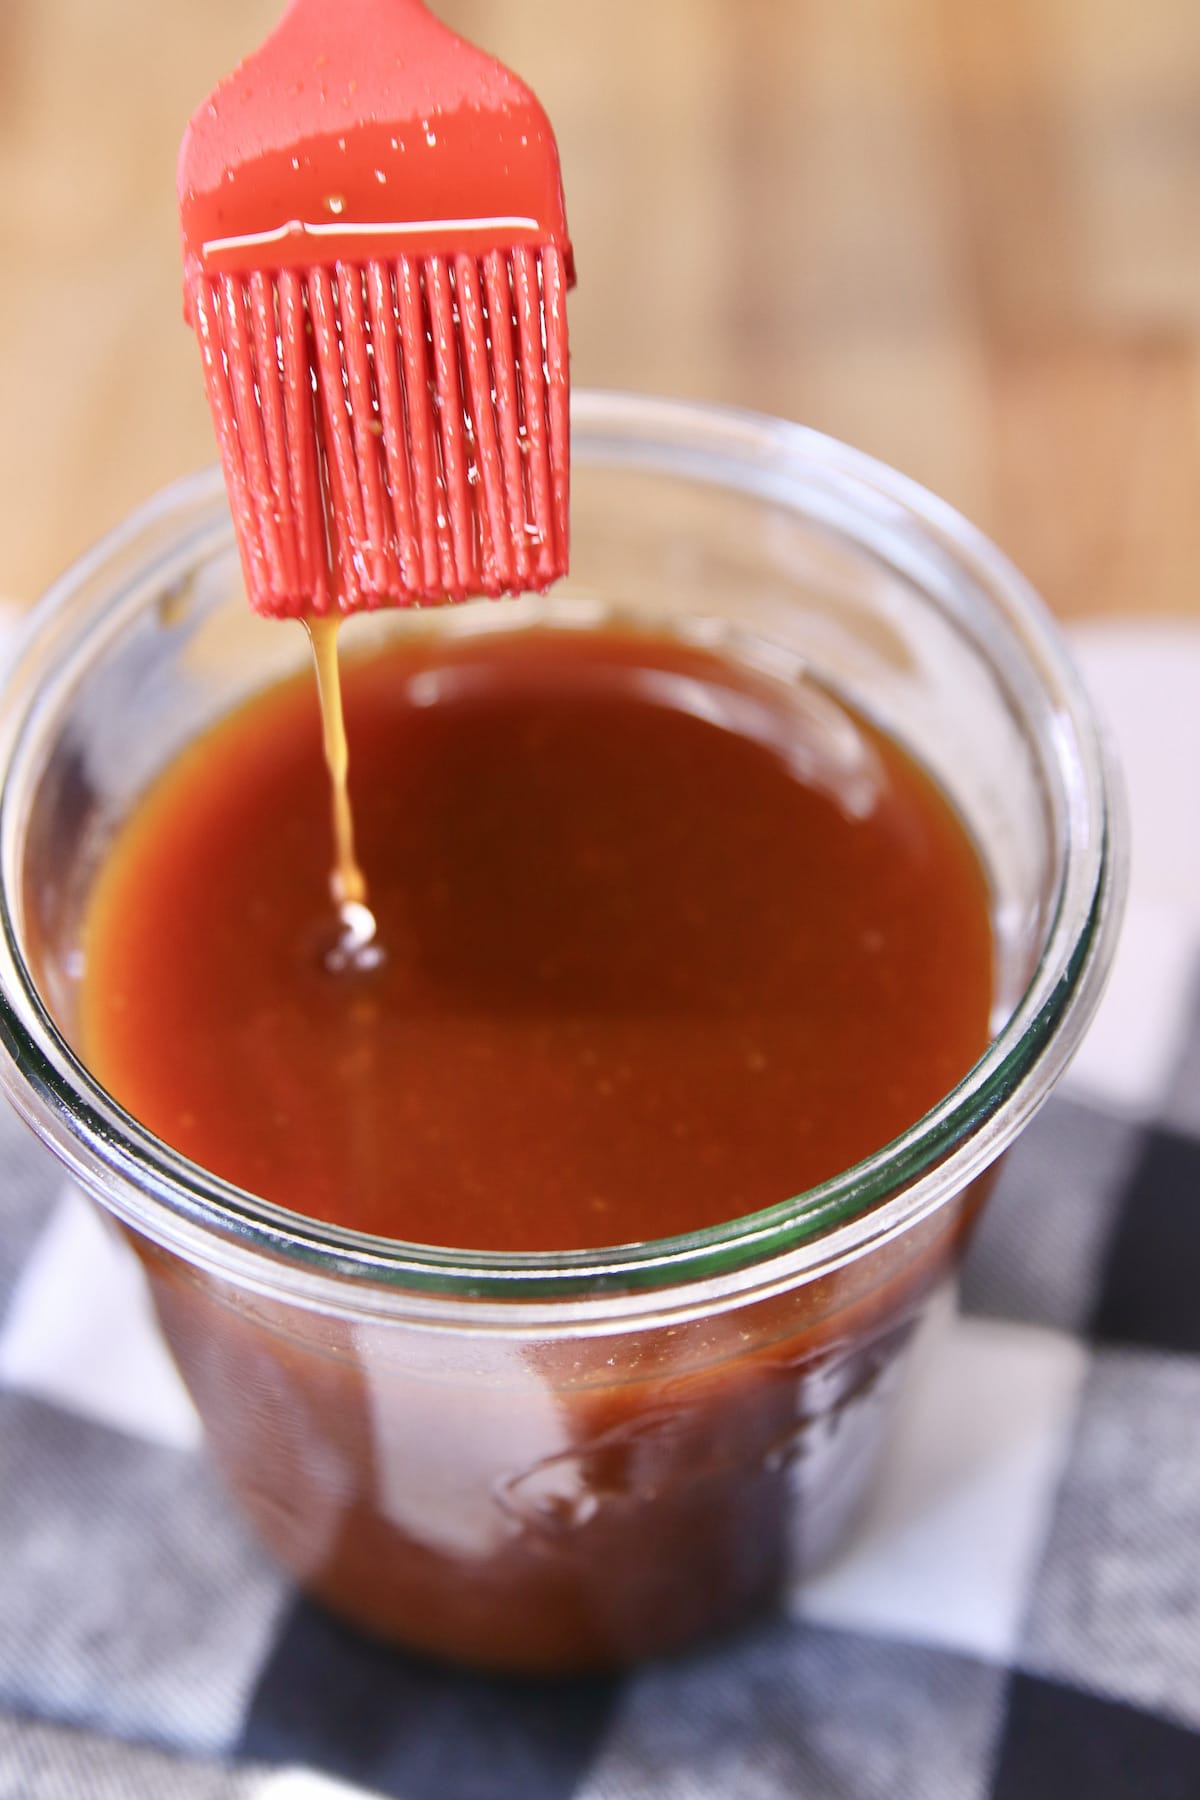 BBQ mop sauce with brush dipping into the jar of sauce.